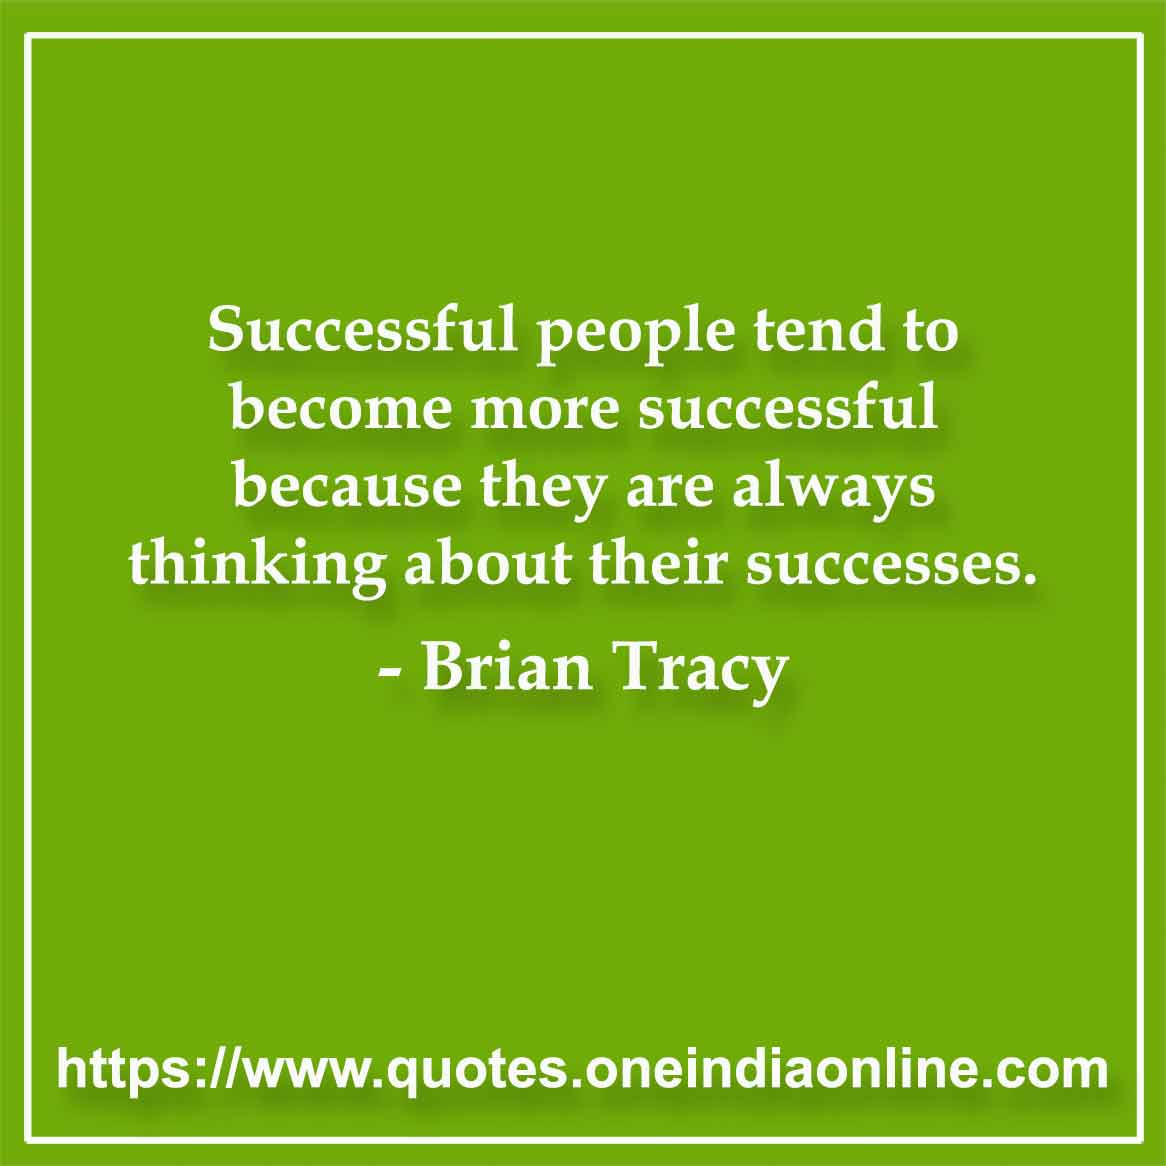 Successful people tend to become more successful because they are always thinking about their successes. Brian Tracy